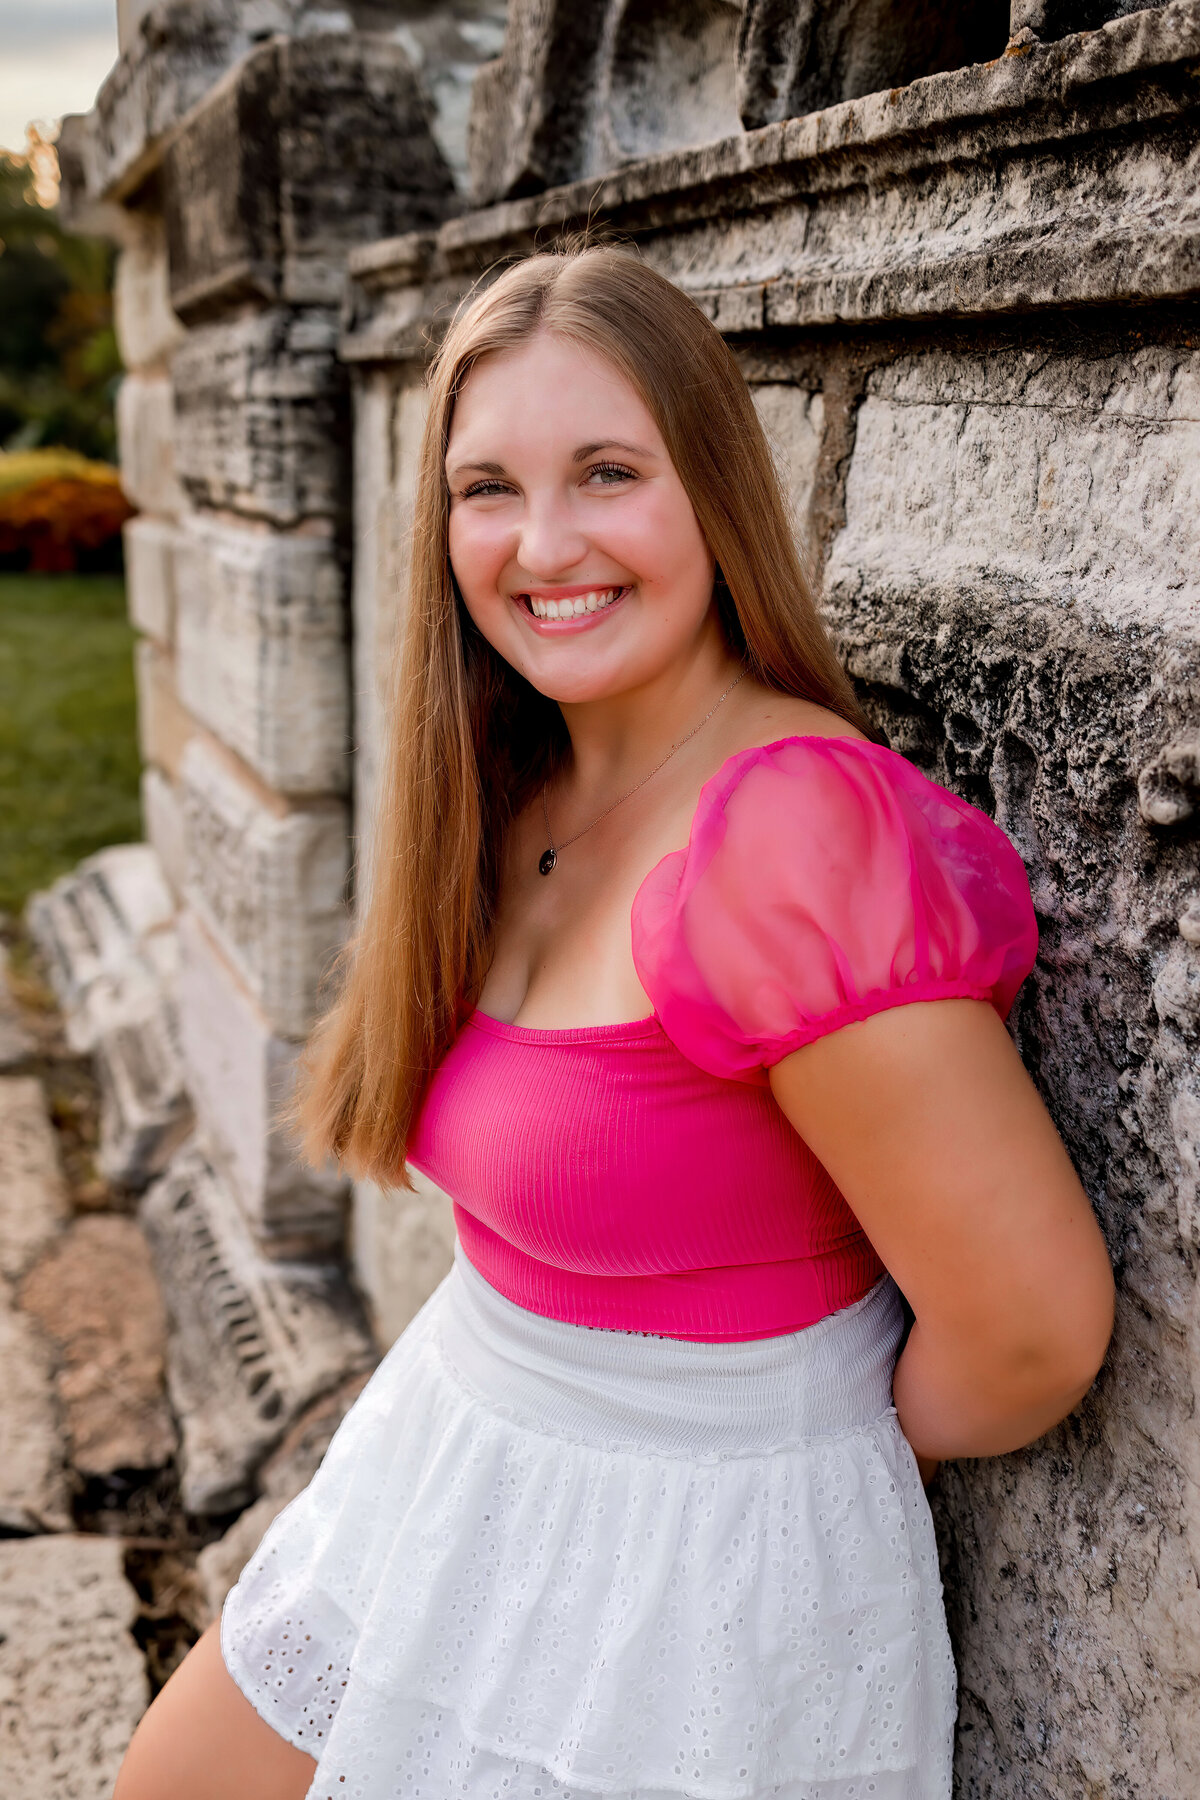 A pretty girl is posing for her senior portraits in twoer grove park next to the ruins.